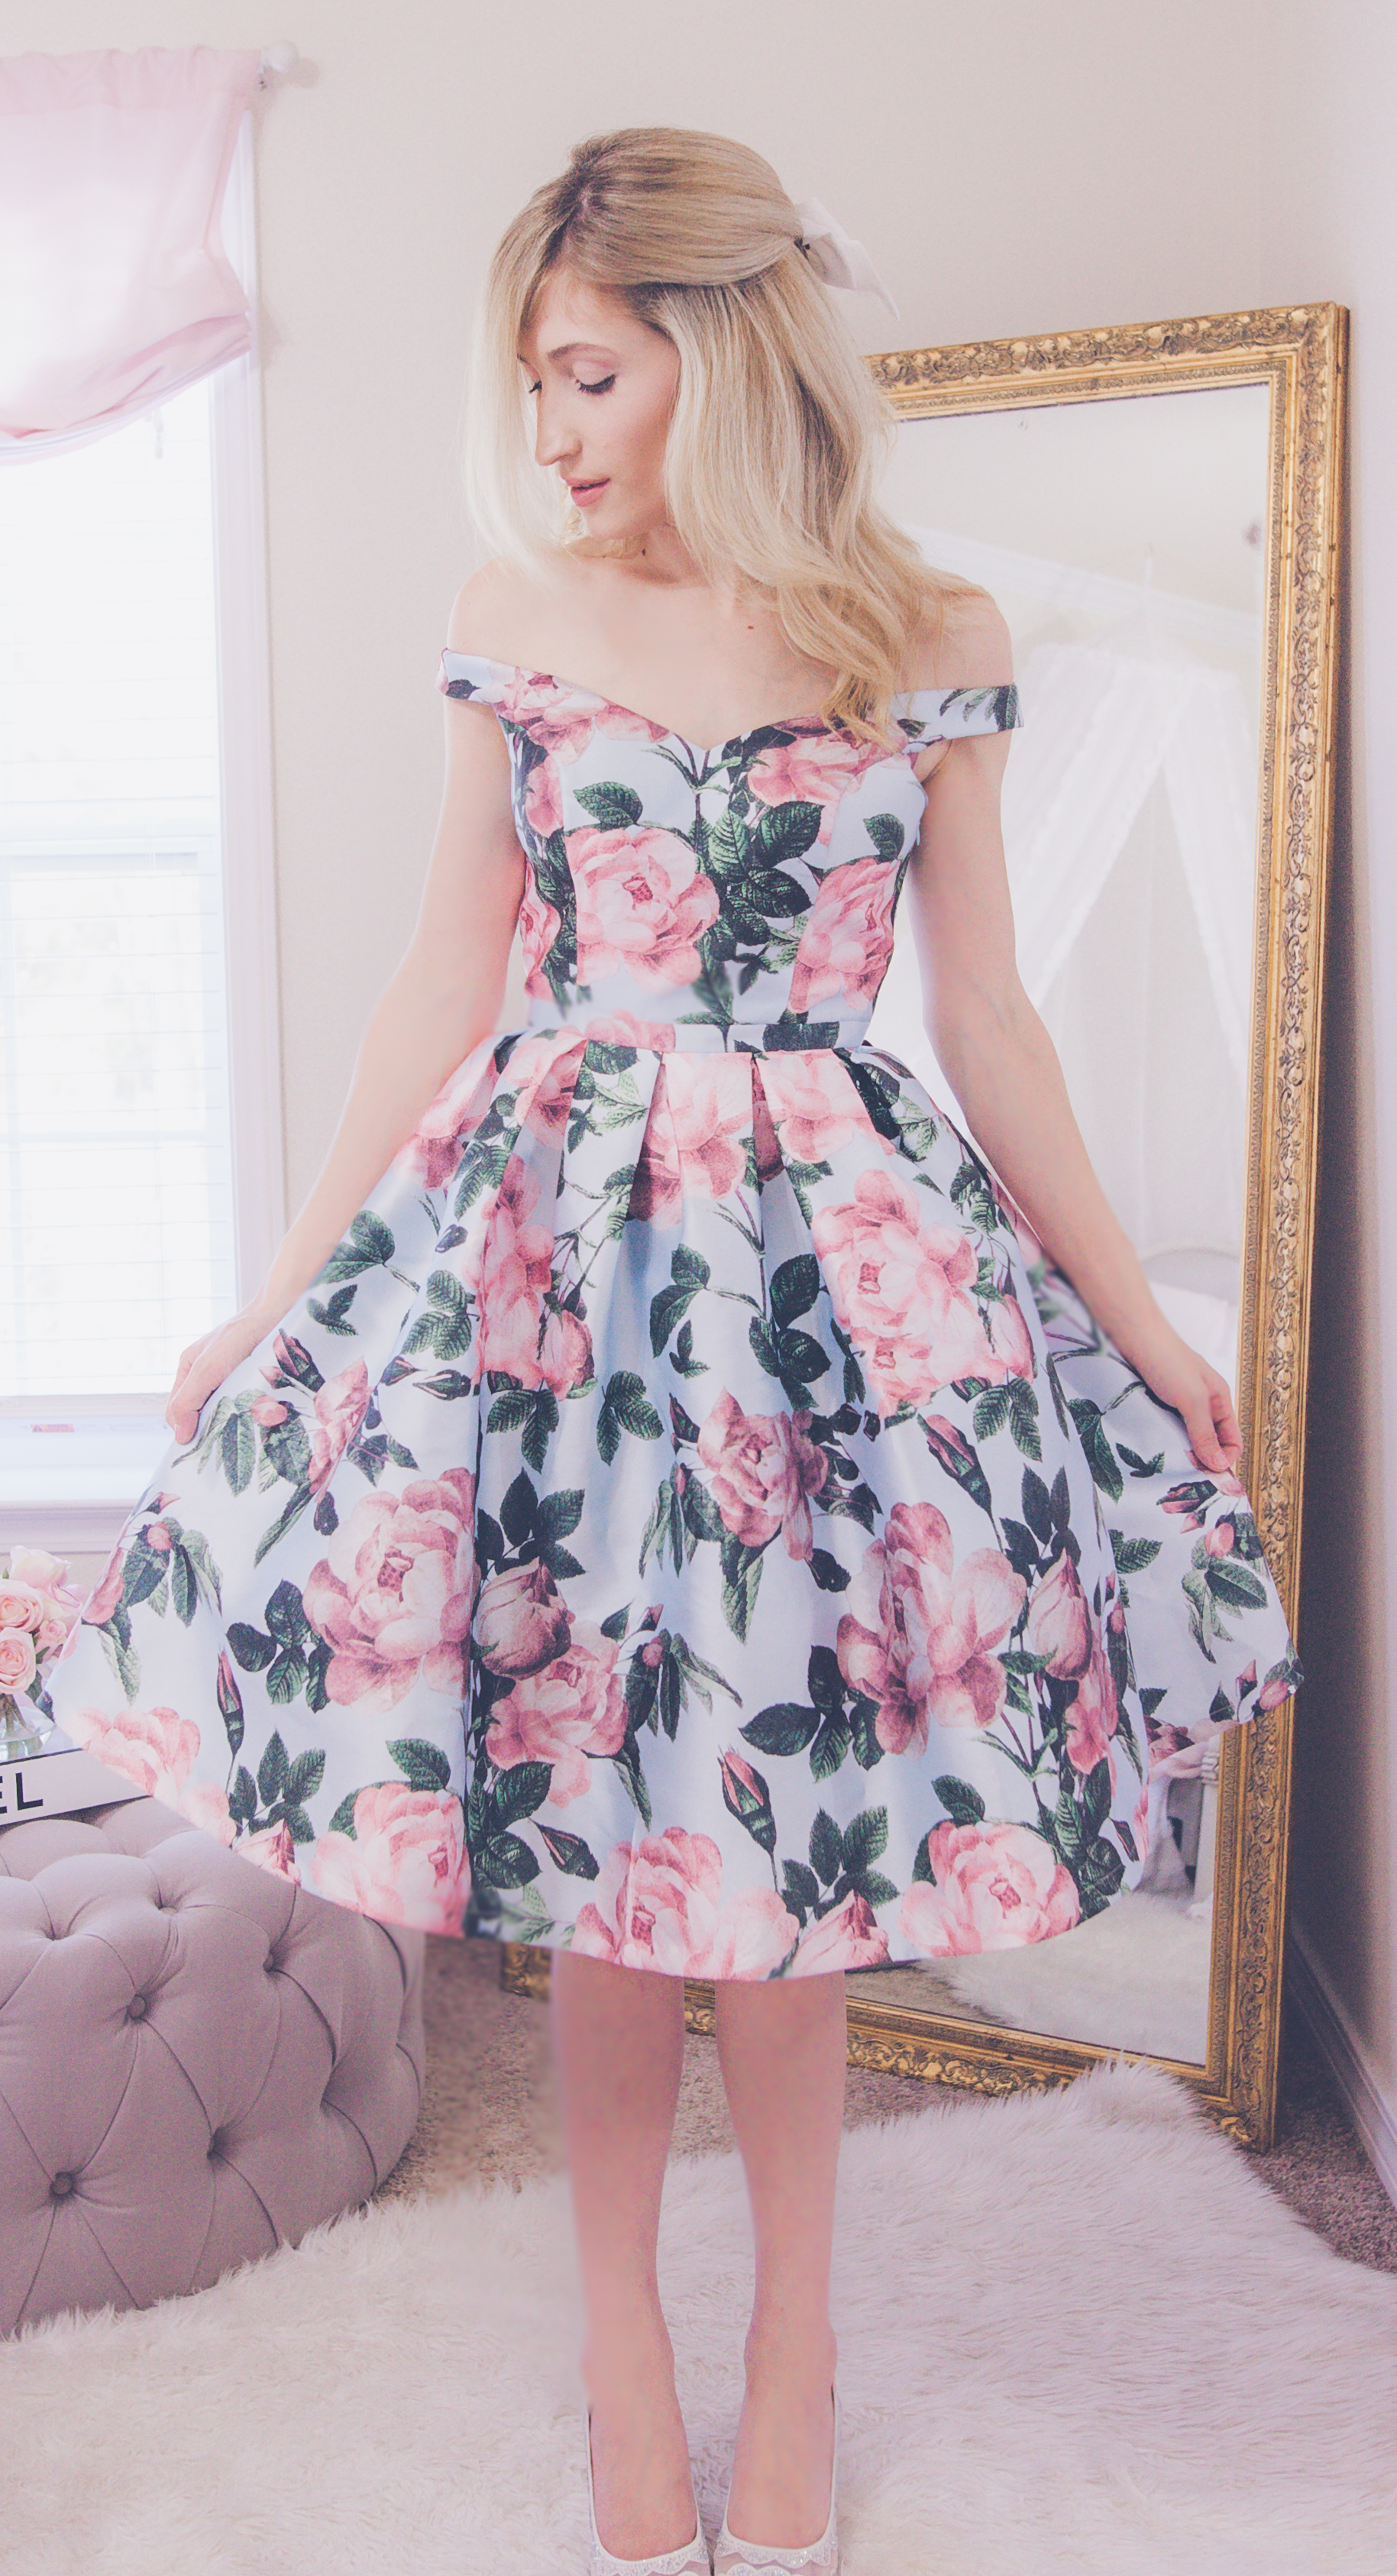 Tips On Where To Shop For Girly Clothes - J'adore Lexie Couture